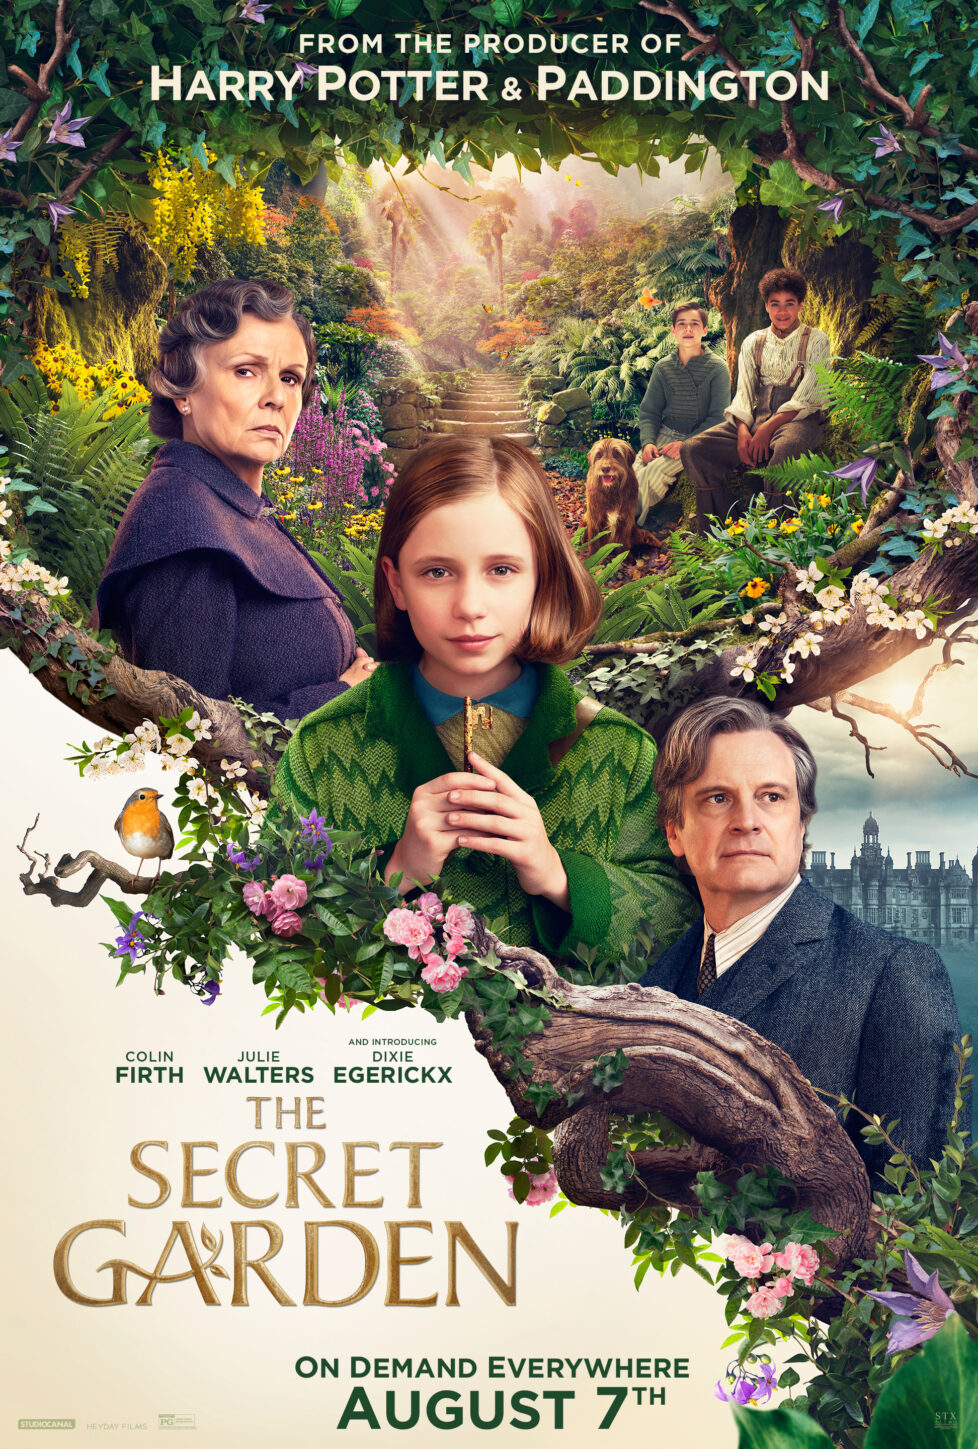 The Secret Garden 2020 Movie Review It S Not What I Expected